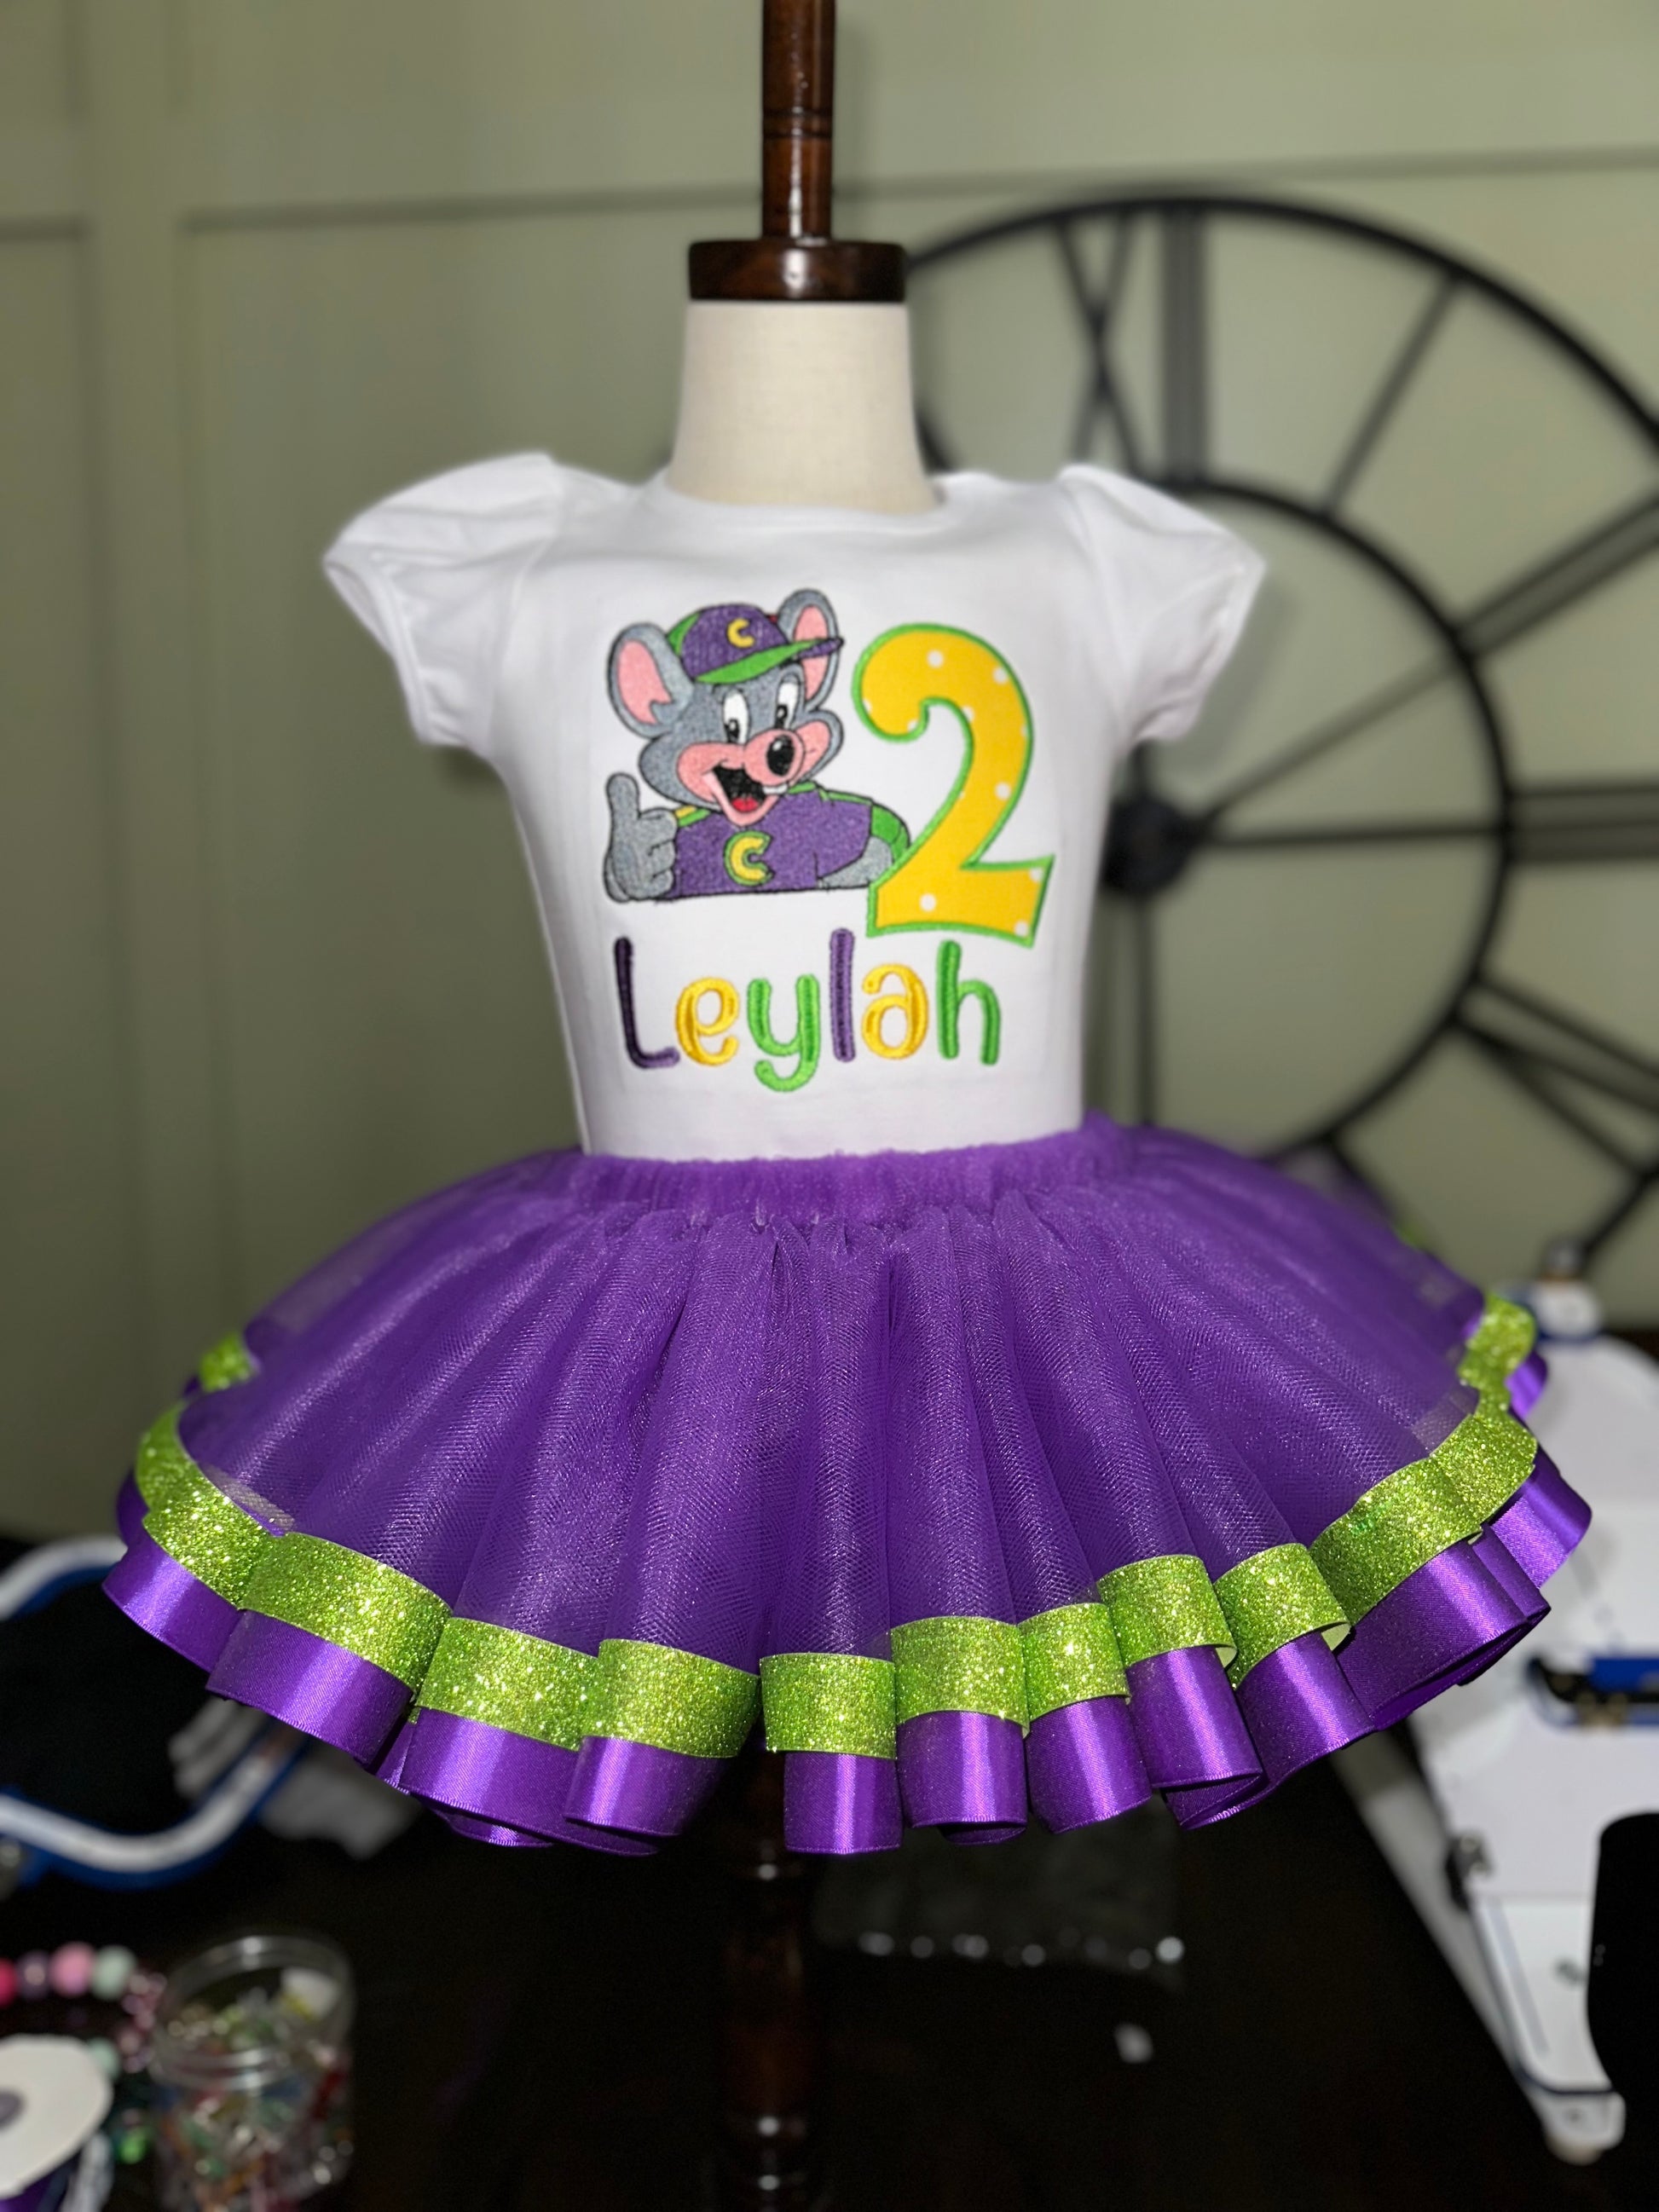 Embroidered Chuck E. Cheese birthday outfit for girls 